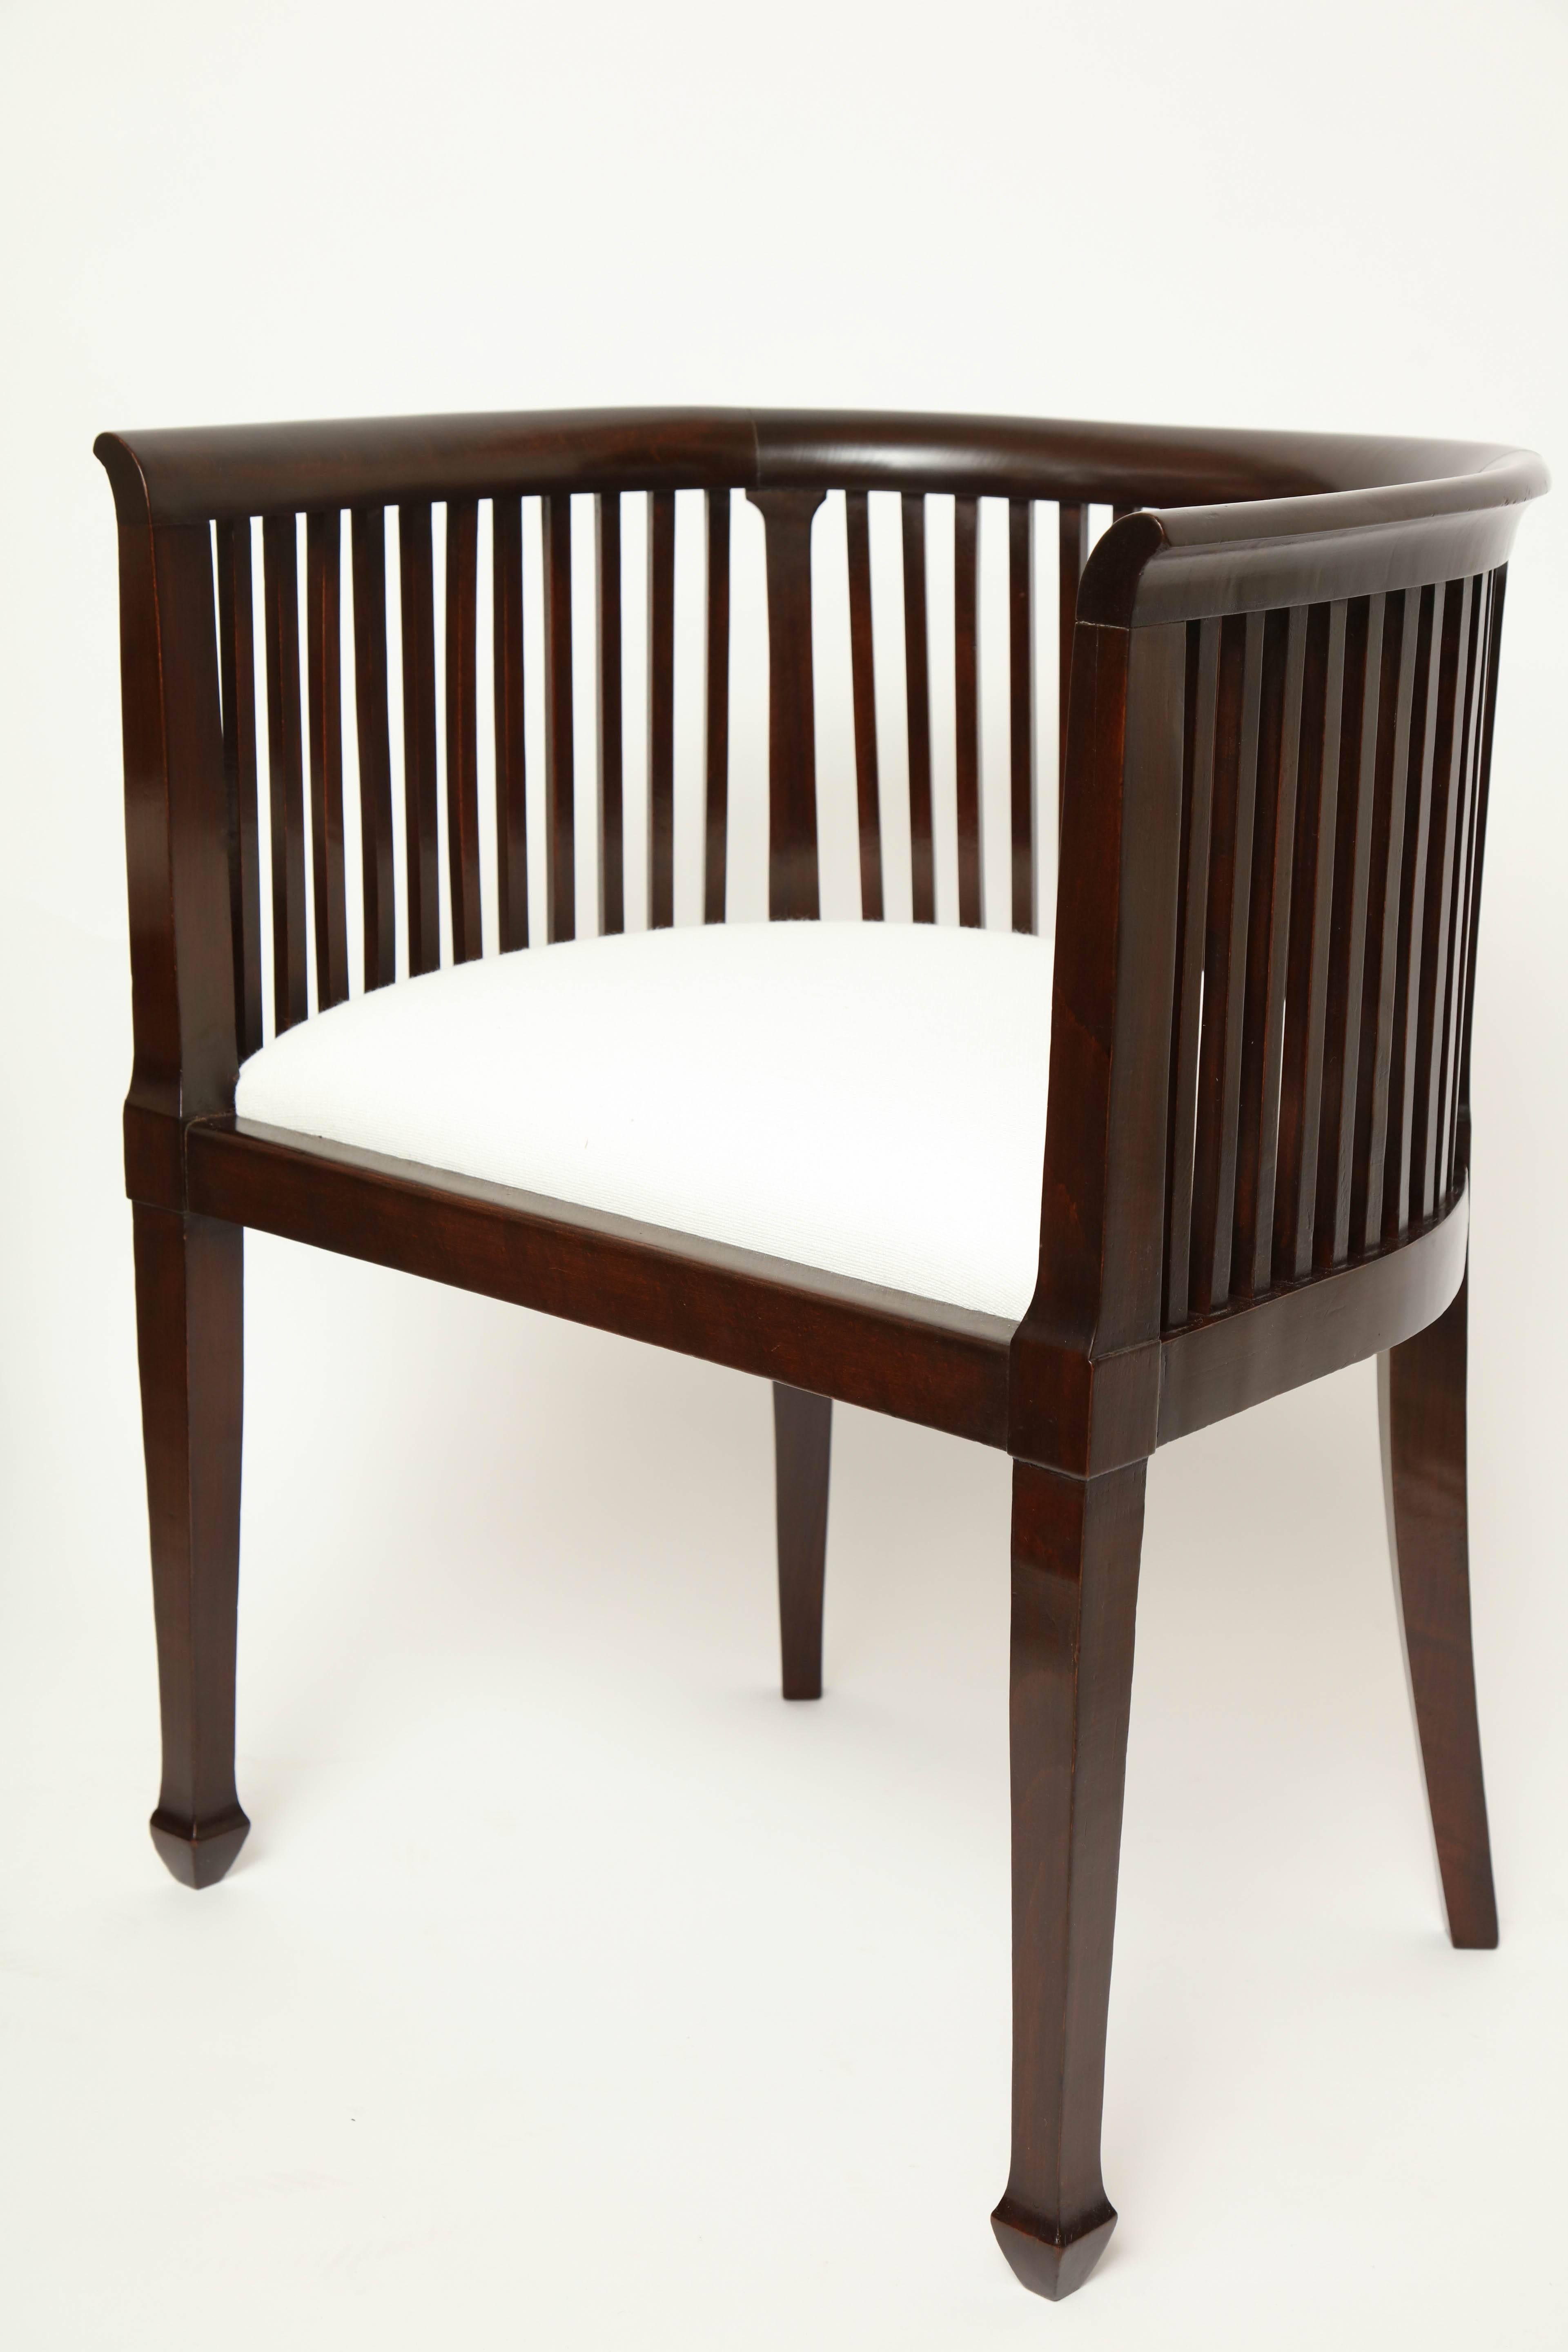 Pair of curved back and slatted mahogany chairs. Newly upholstered in Belgian linen.